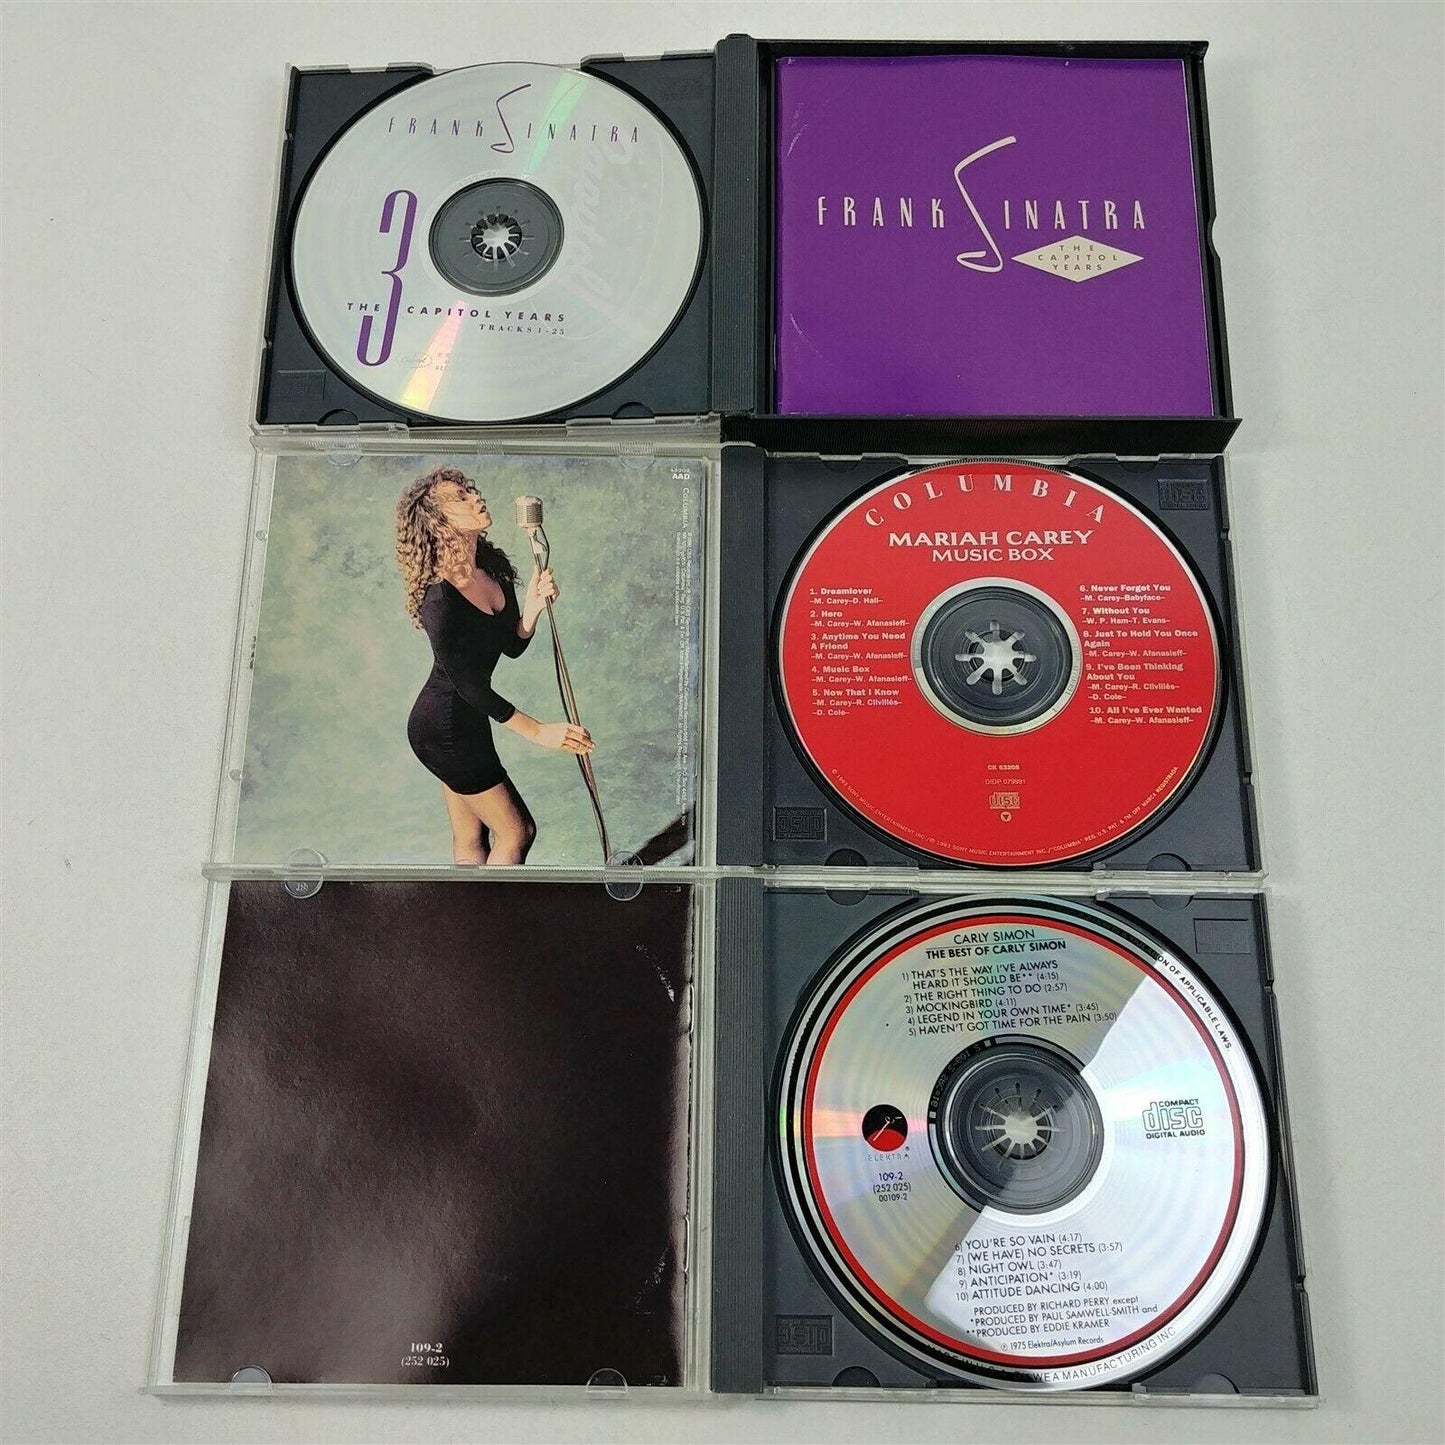 Pop Rock Country Music Carly Simon Willie Nelson Mariah Carey 9 CD Lot